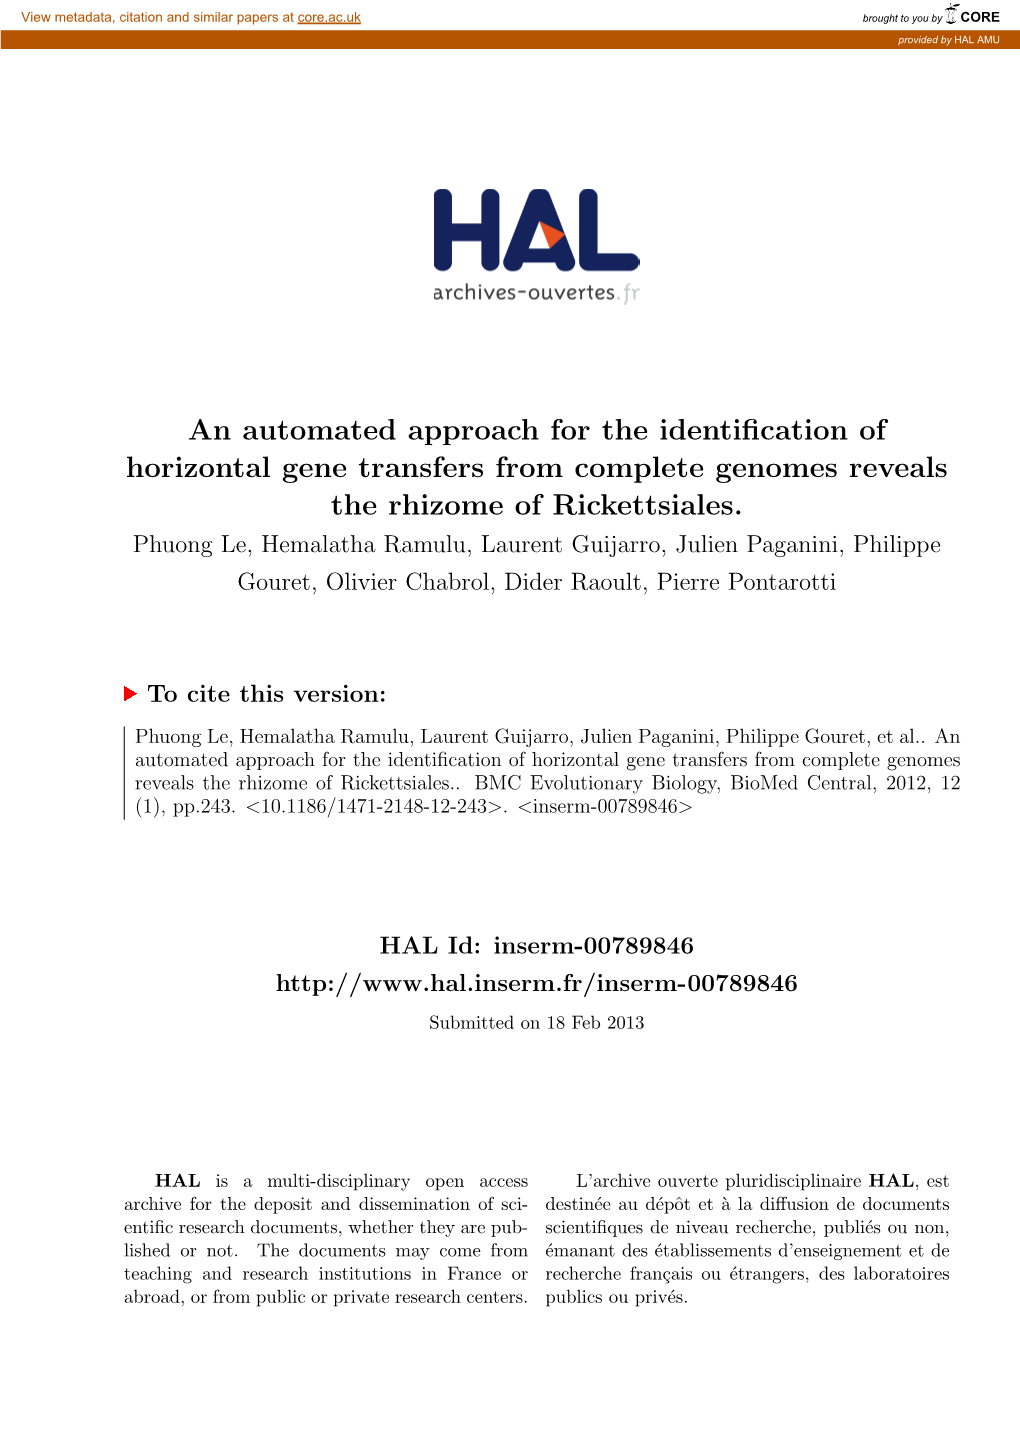 An Automated Approach for the Identification of Horizontal